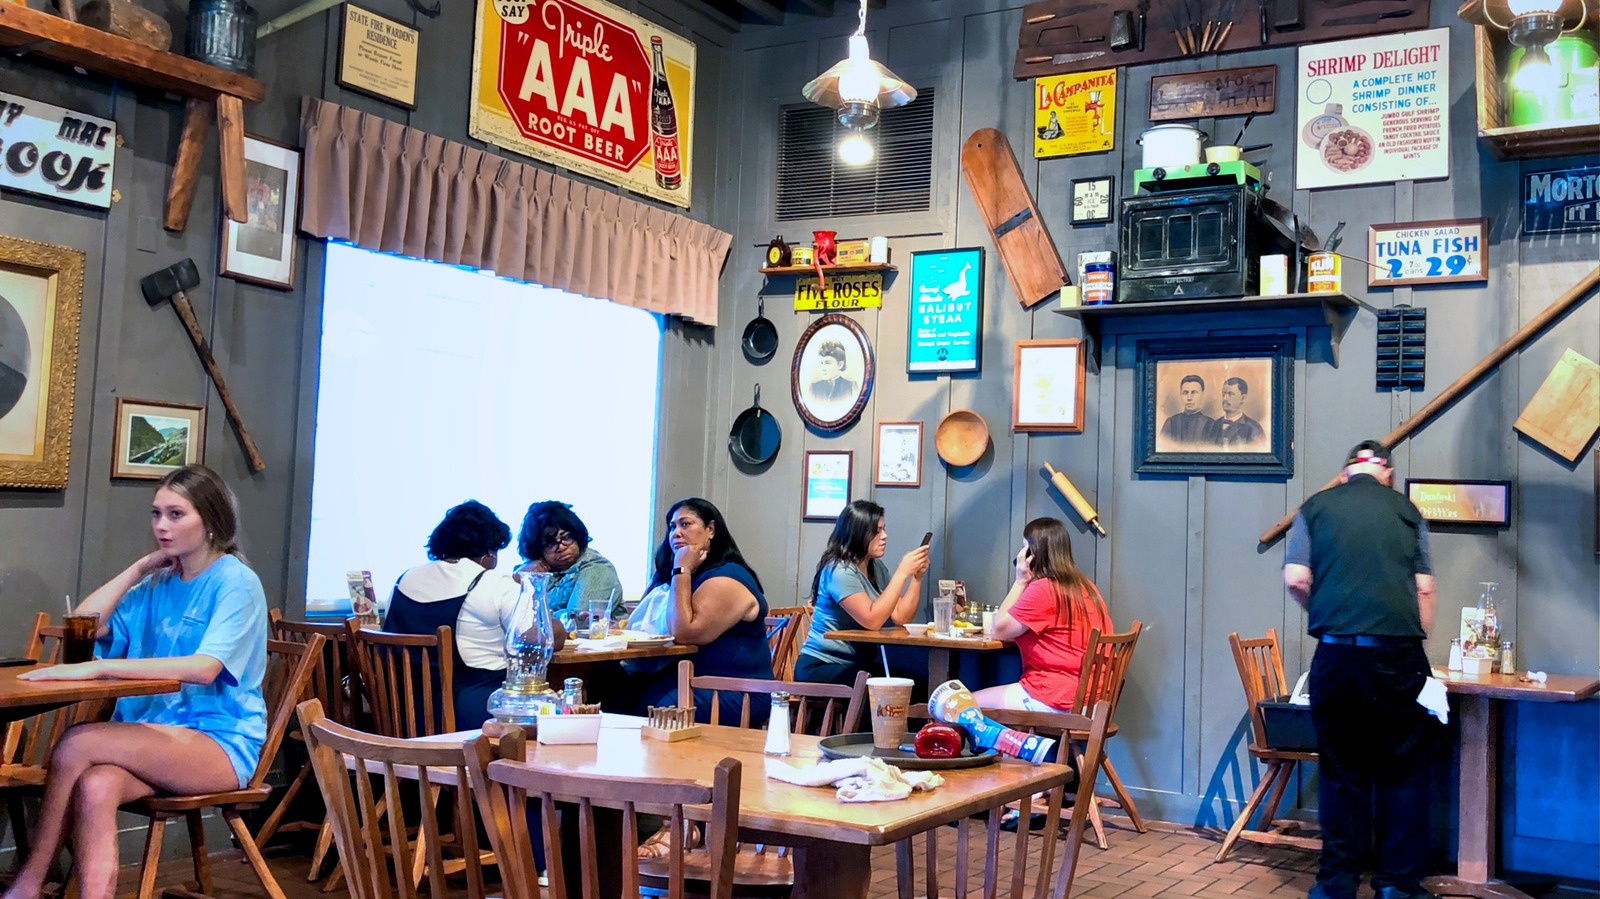 Cracker Barrel Shakes Up Menu and Decor in Big Revamp: Will It Win Back Diners and Boost Stock?